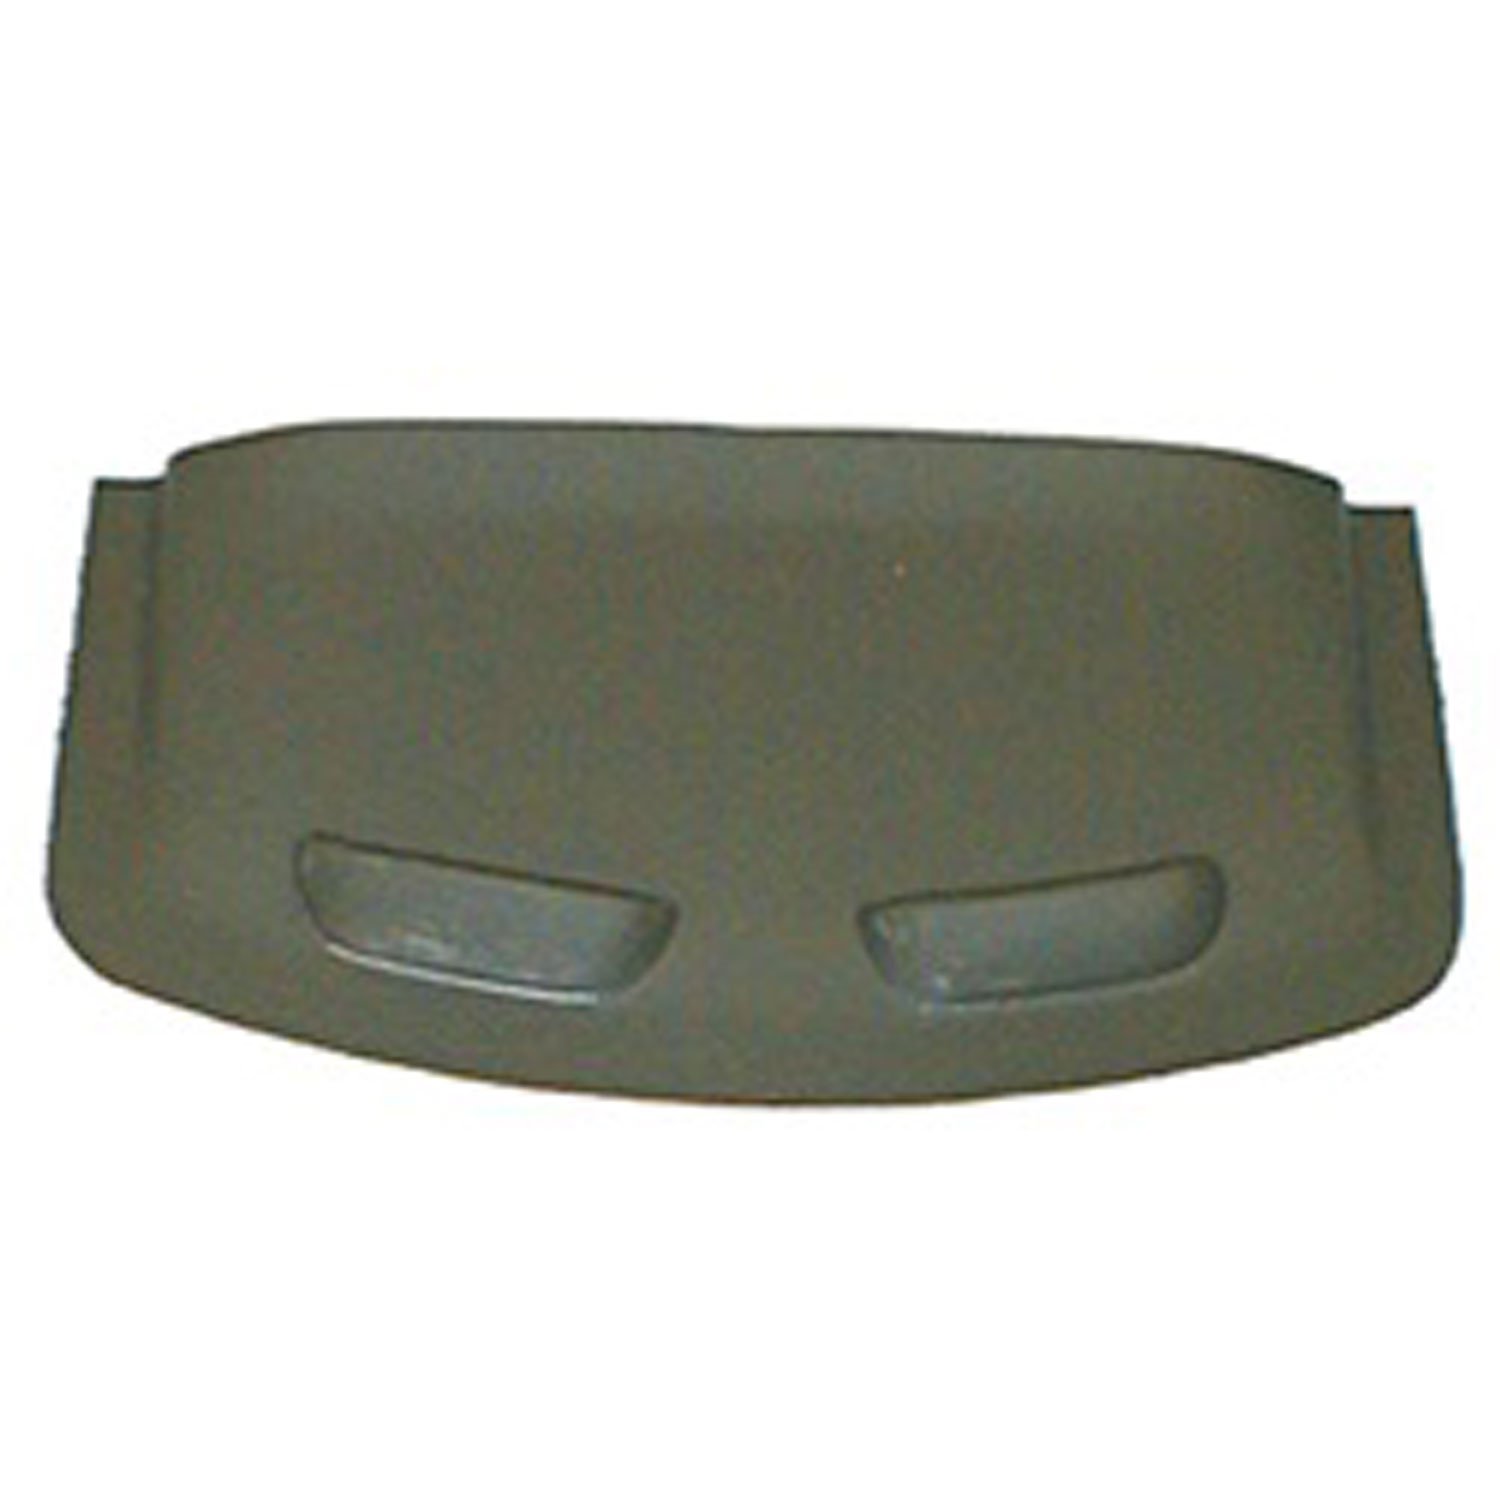 Replacement axe sheath from Omix-ADA, Fits 41-1945 Willys